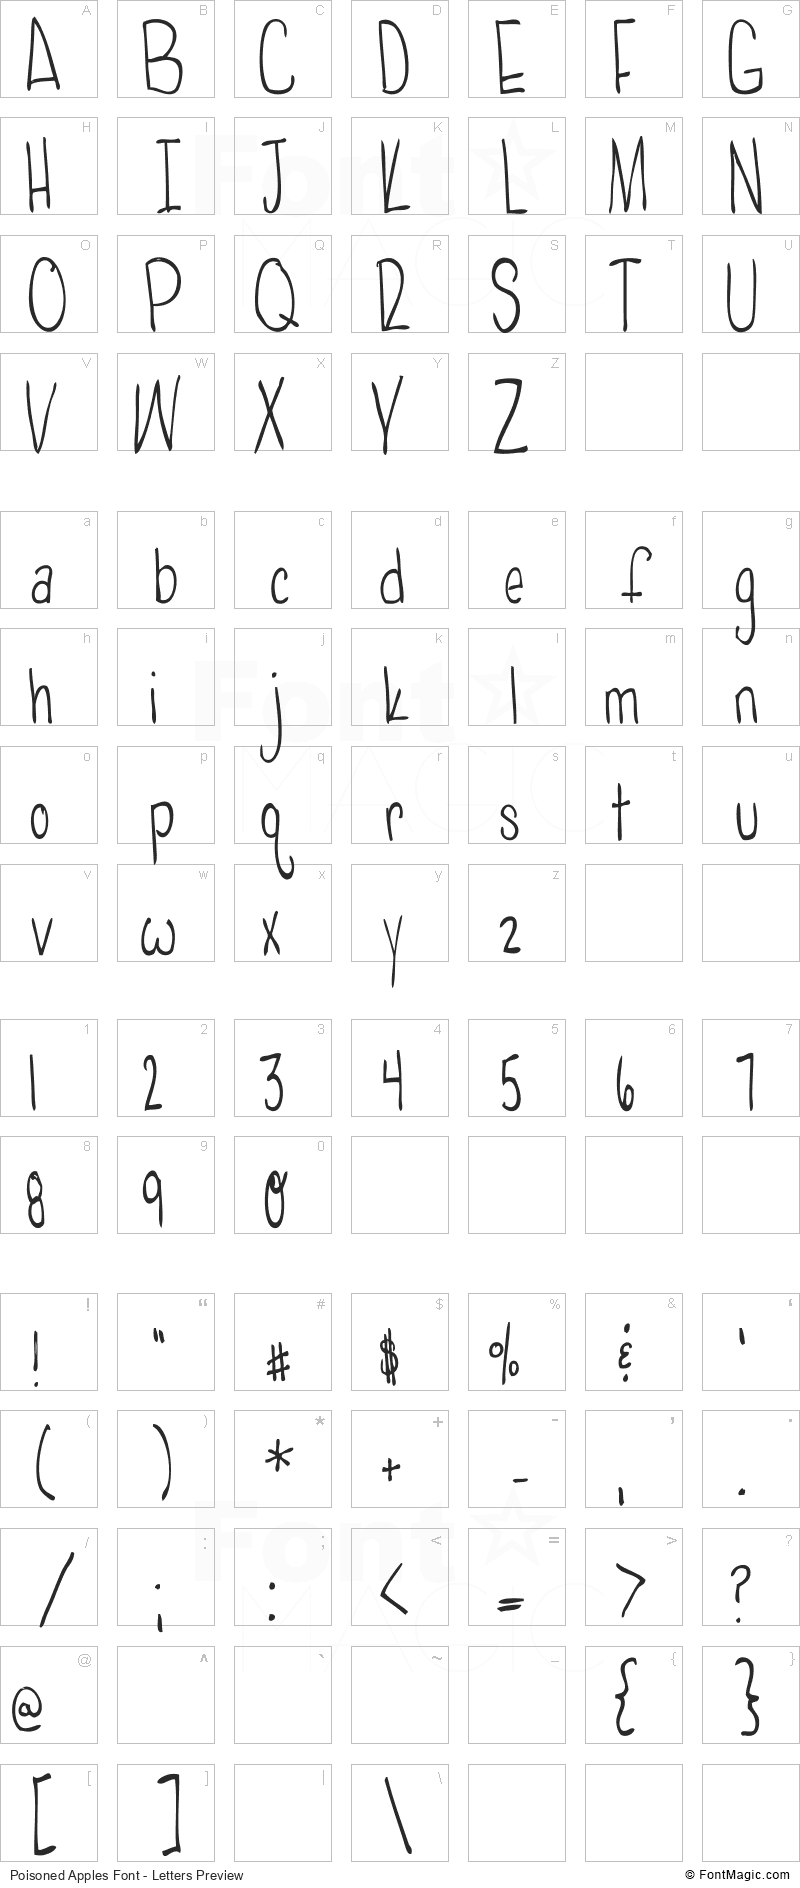 Poisoned Apples Font - All Latters Preview Chart